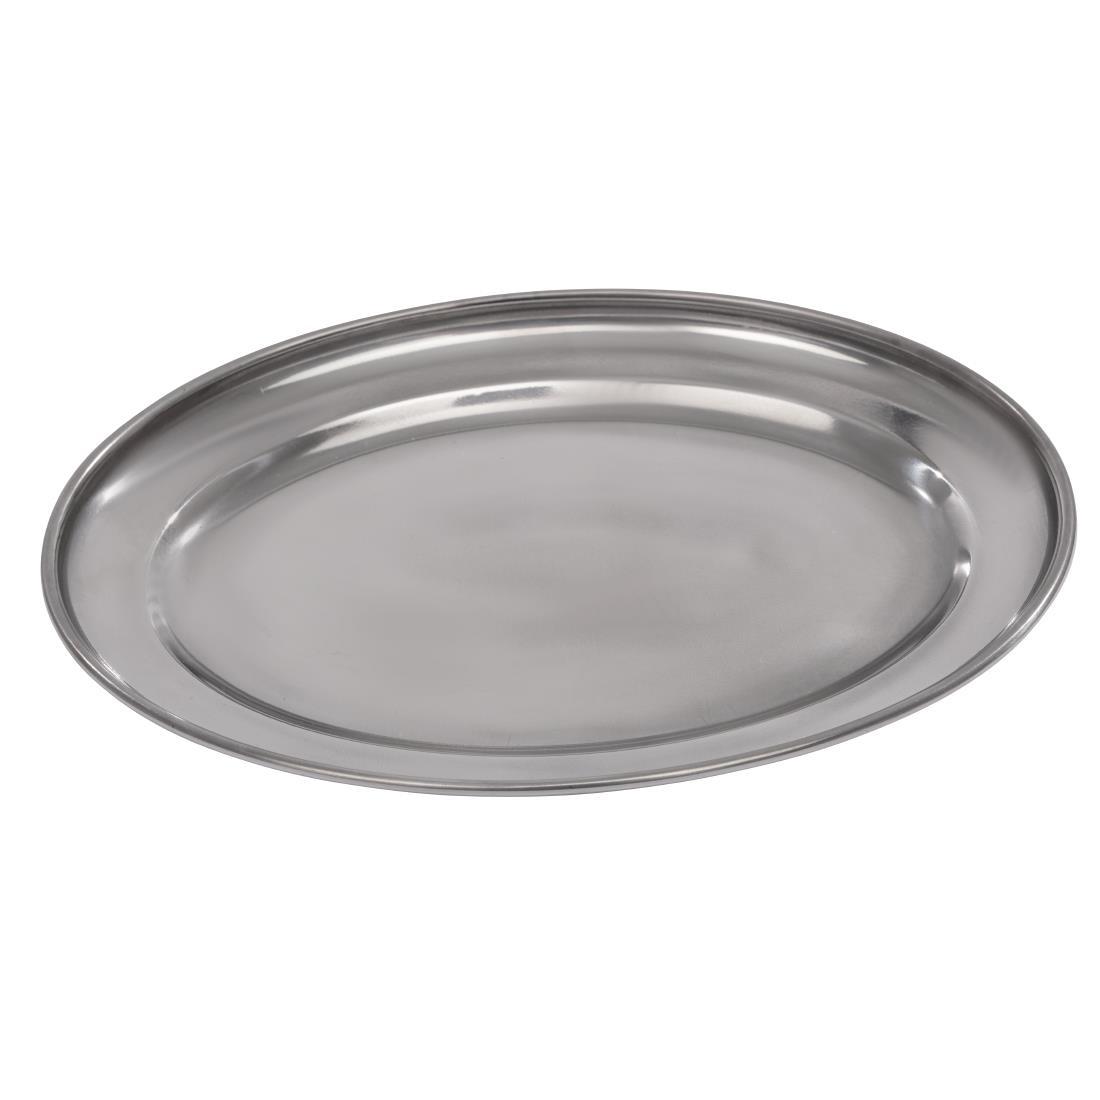 Olympia Stainless Steel Oval Serving Tray 200mm - K360  - 2